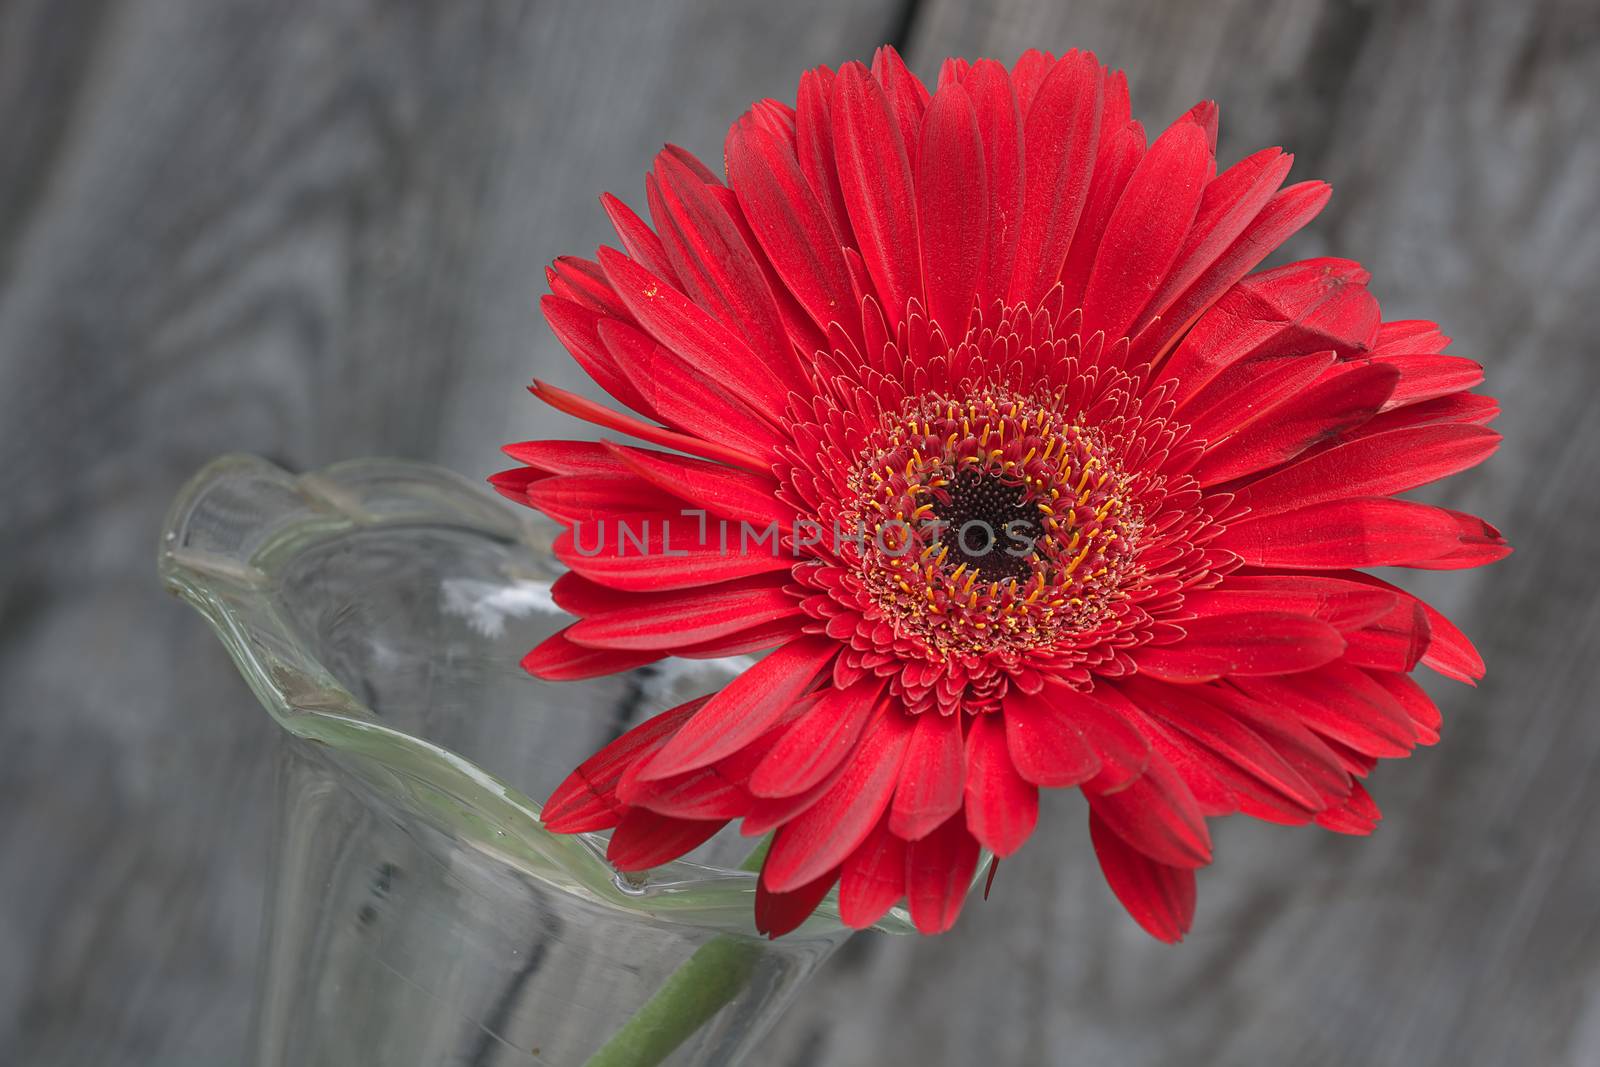 red gerbera flower in the vase close-up against wooden wall, tilted angle